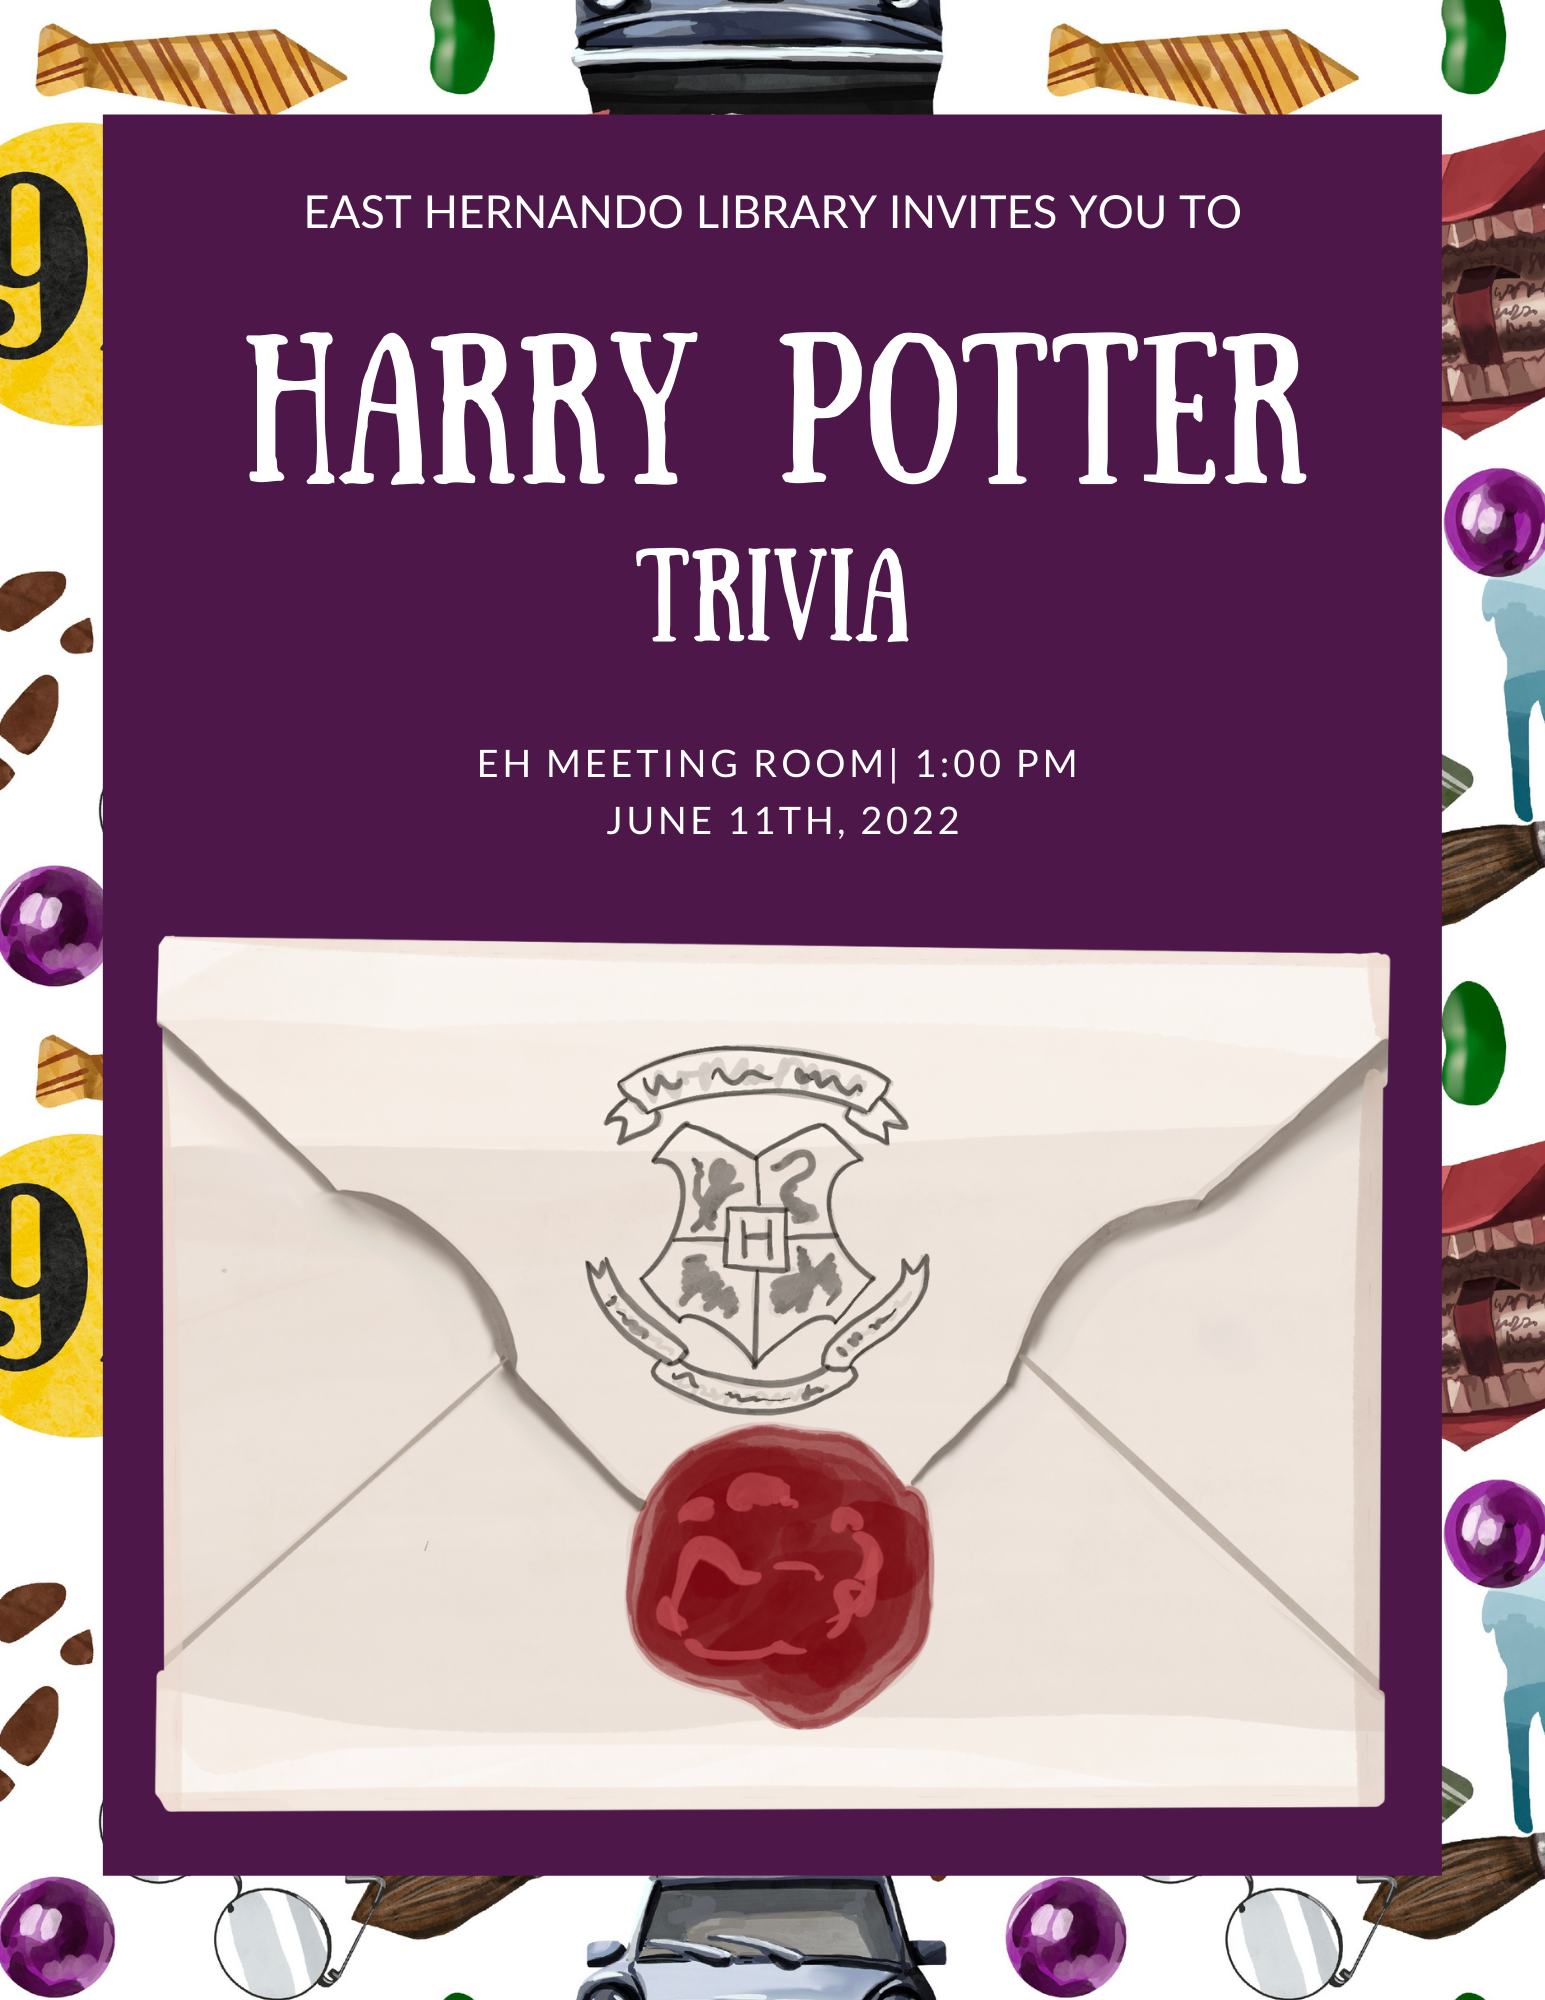 Harry Potter Trivia @ Your Library! June 11, 2022 at 1:00PM